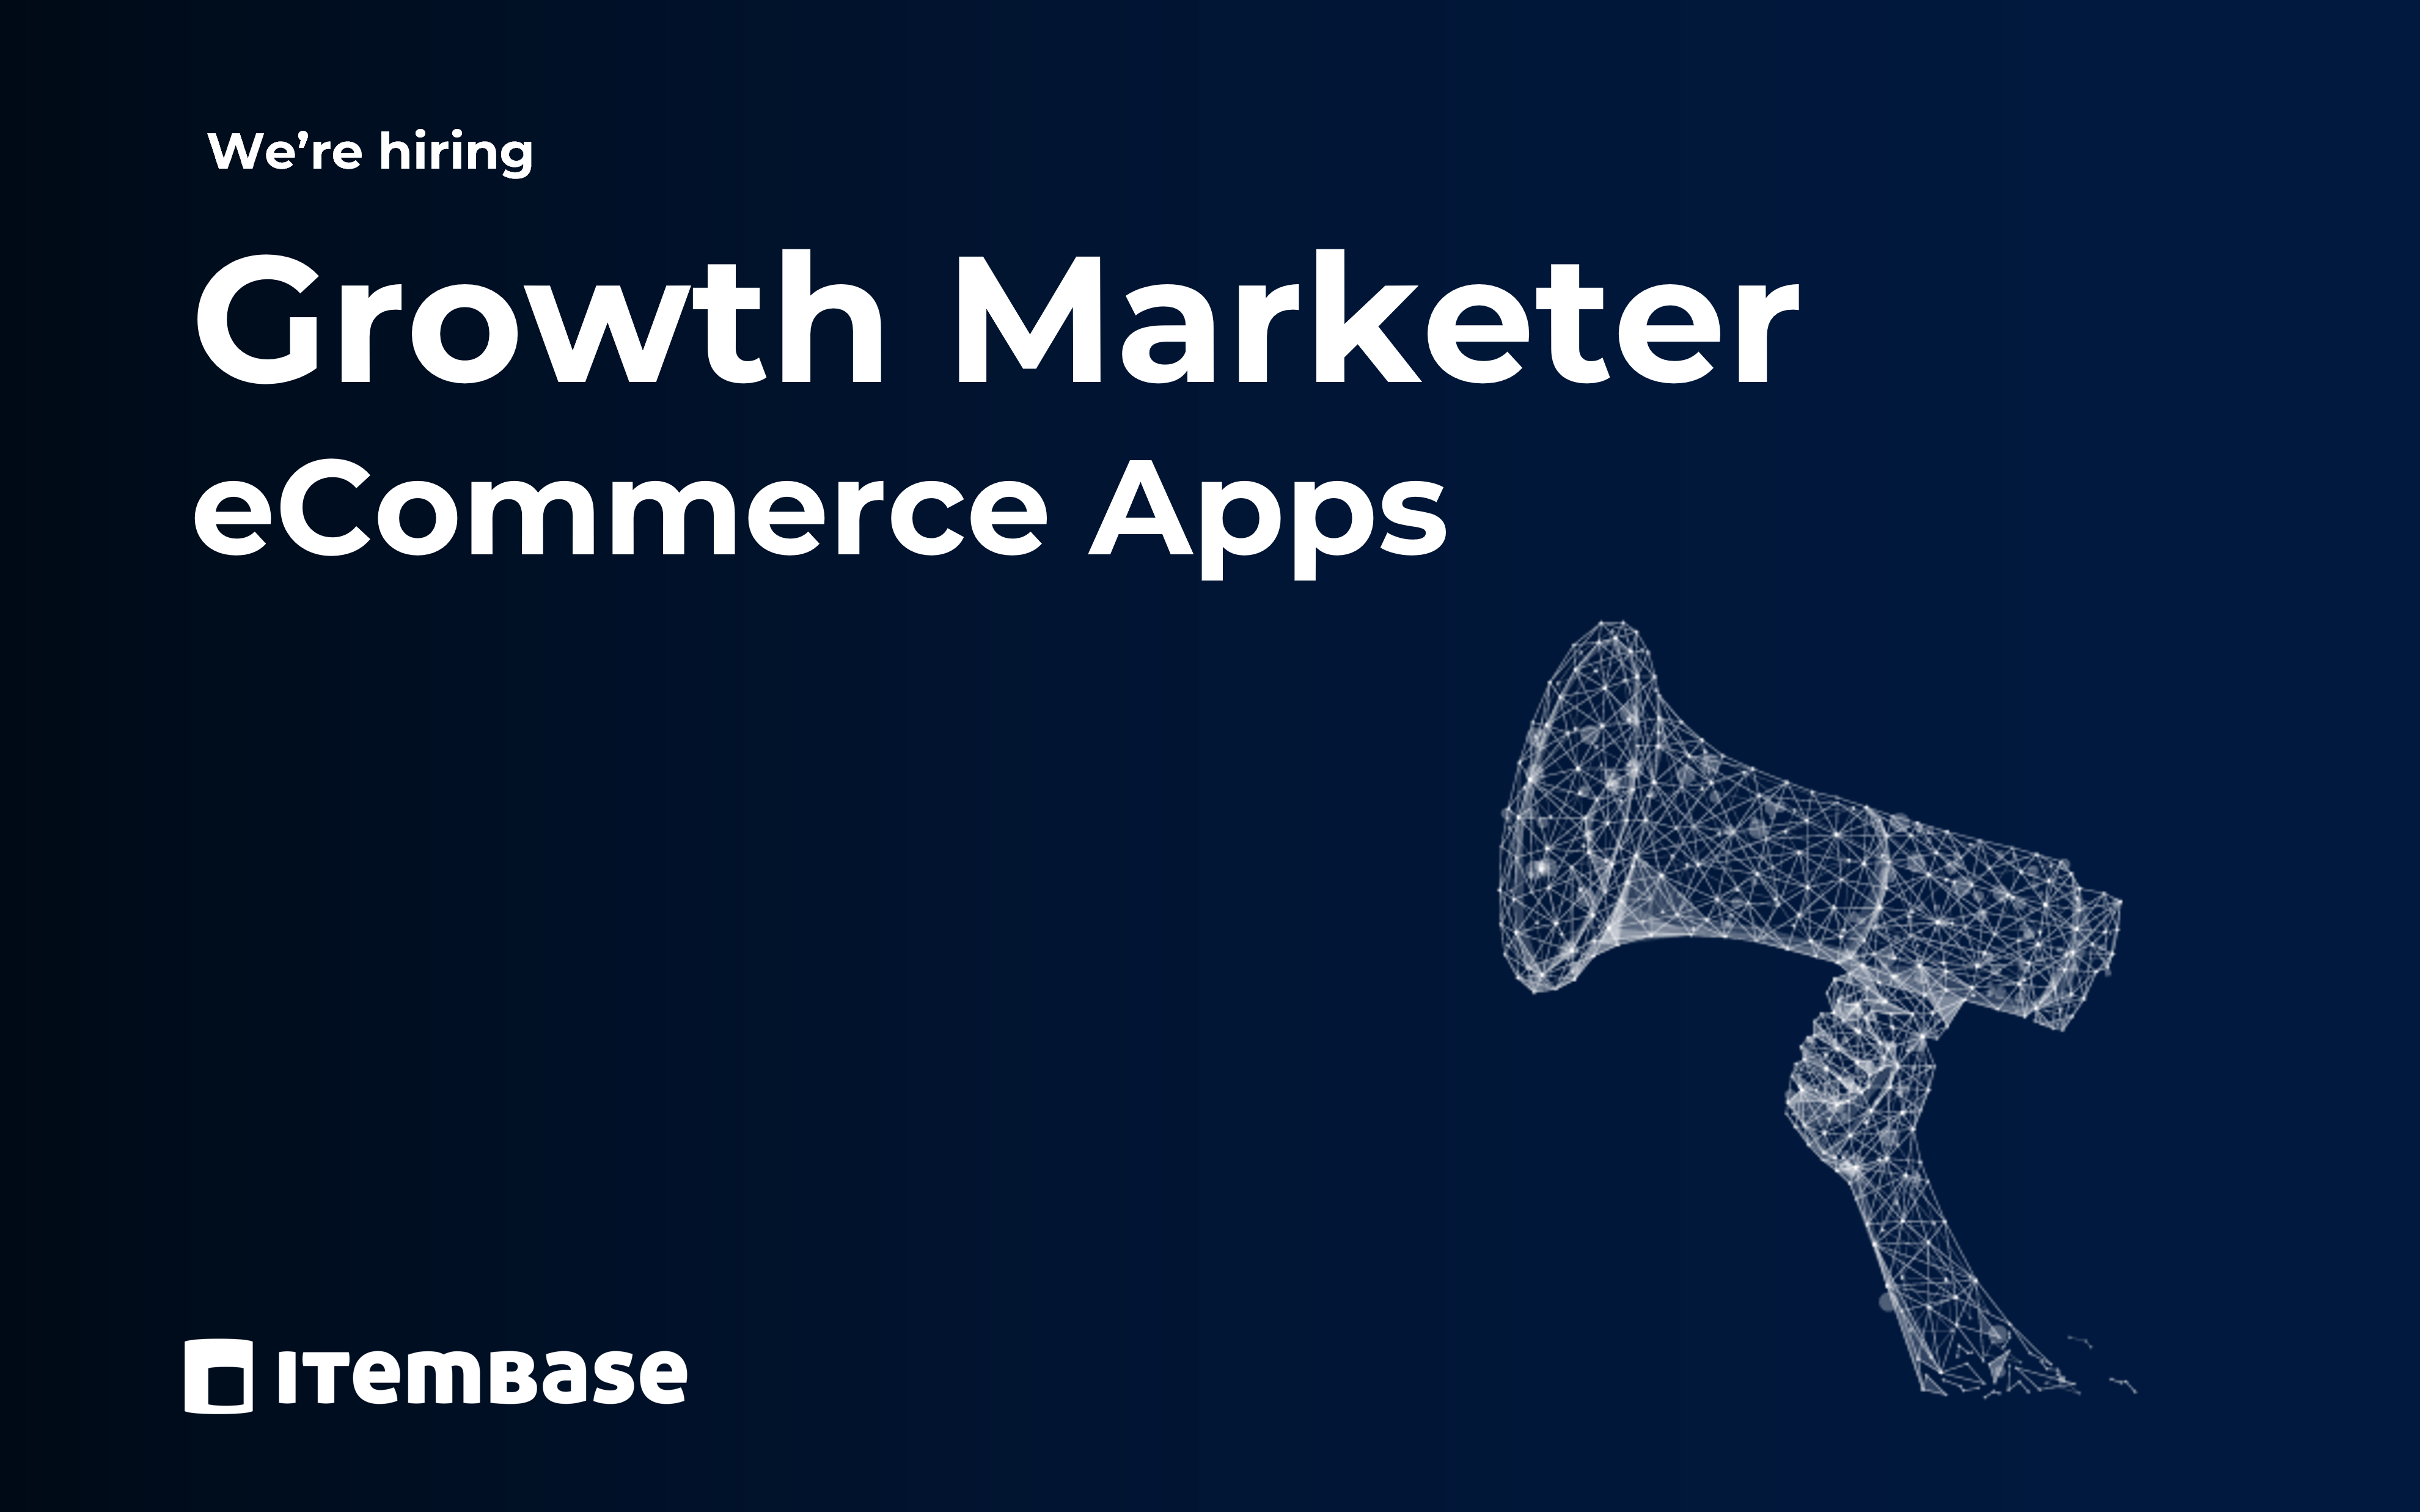 Open Position 010258- Itembase - Growth Marketer eCommerce Apps